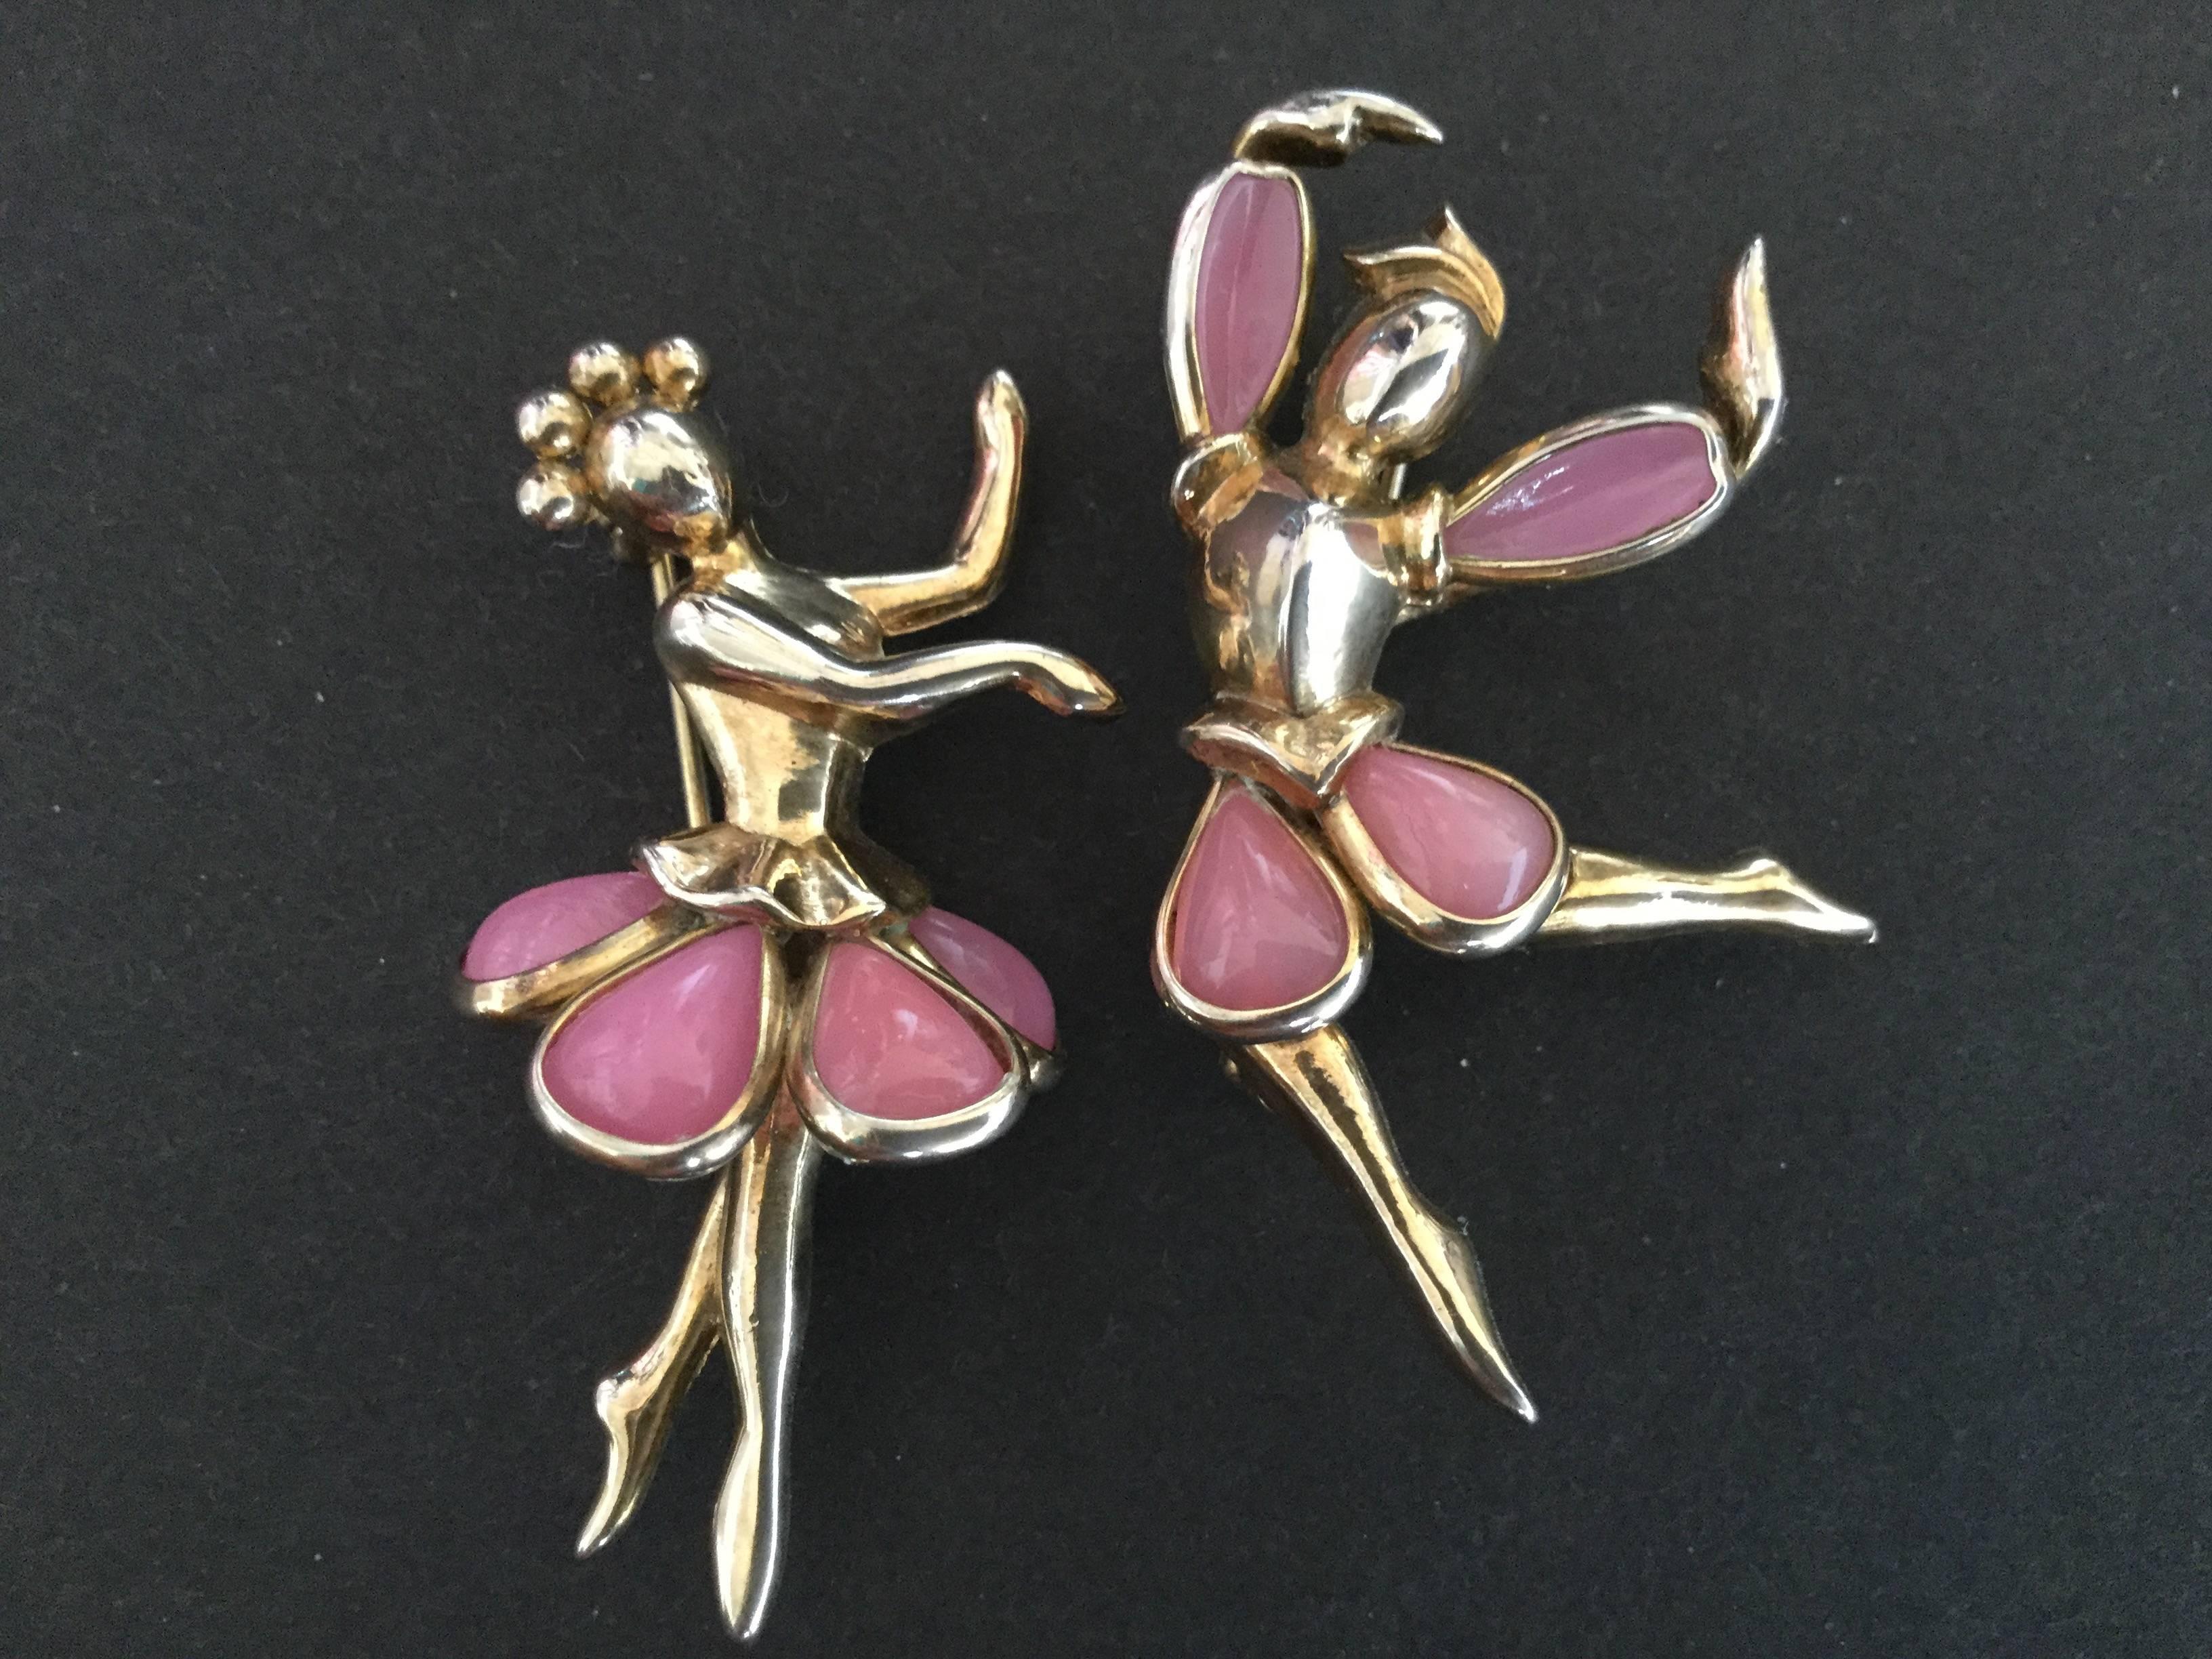 This is such a charming set of matched brooches/pins. Tiny ballet dancers
interact. An iconic 1950's design. The dancer's costumes are made of bezel set
pink glass tear-drops. There is such grace and eloquence in the design. Unsigned. Excellent